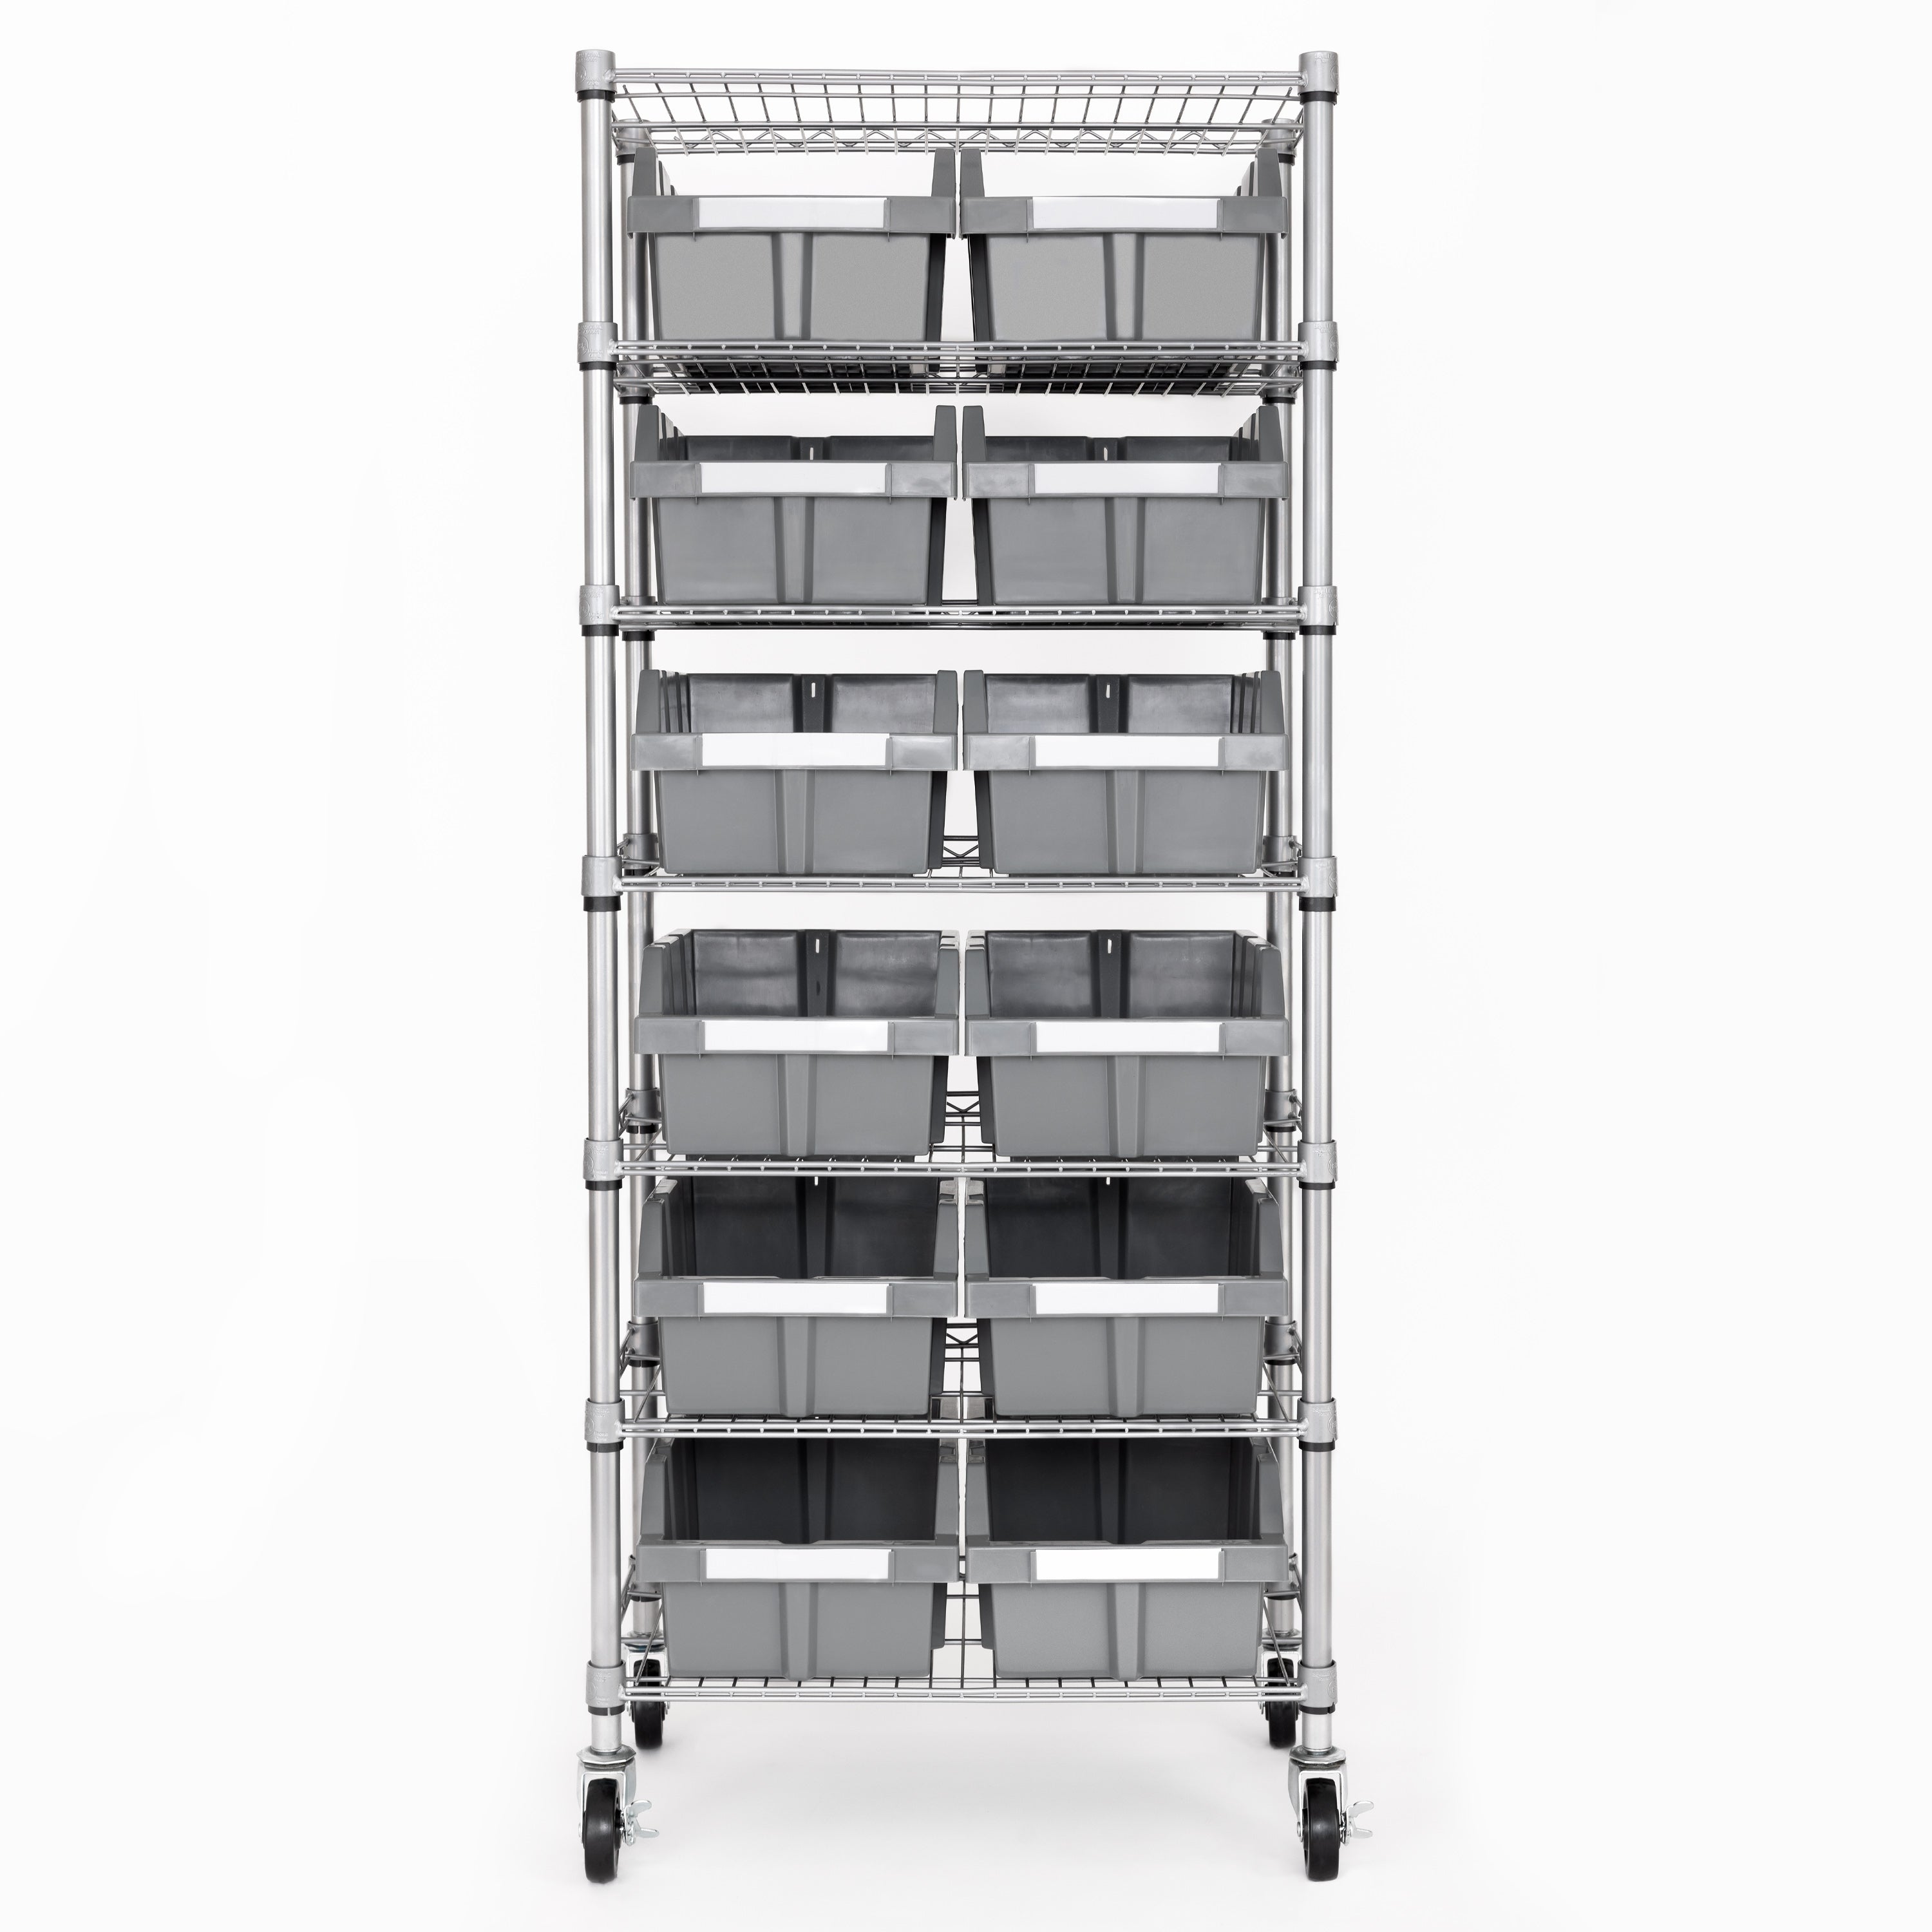 HetayC VFile37 Vertical File Storage Box With 8 VFolder37 Stores Flat Items  Up to 24x36 